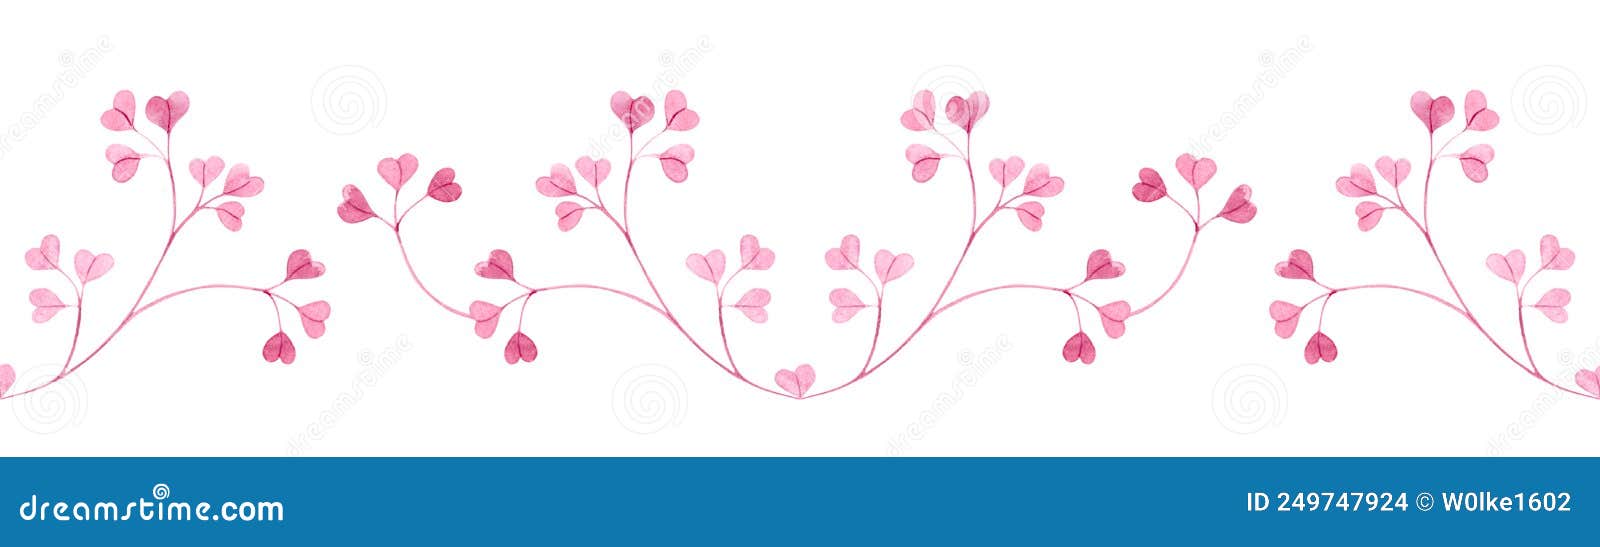 seamless watercolor border with pink little twigs of leaves in the  of hearts on a white background.